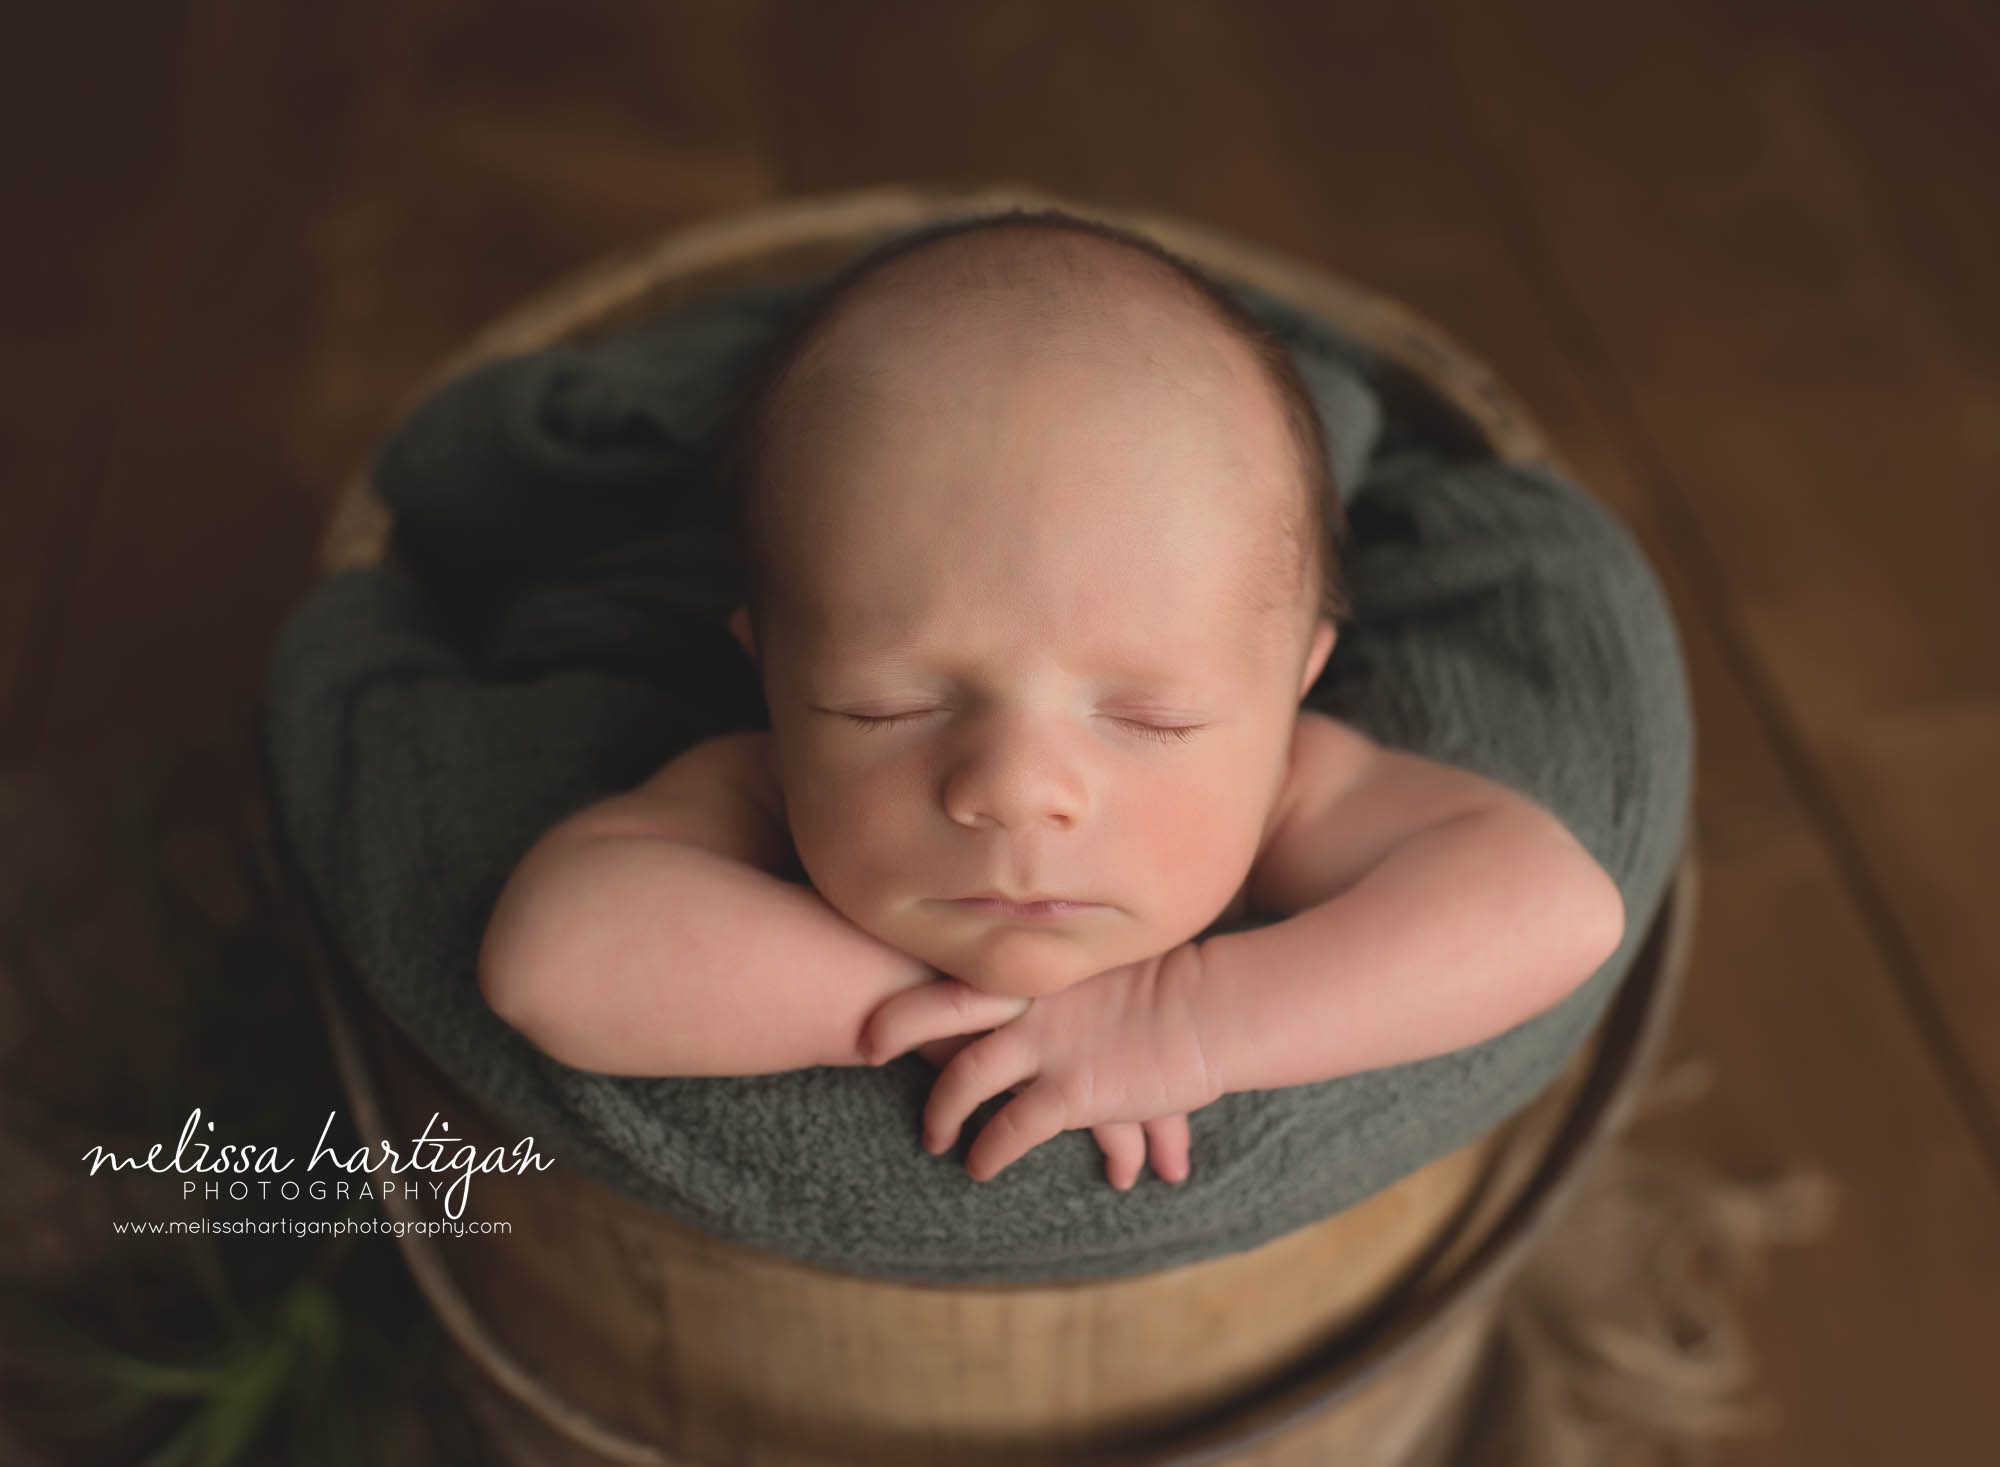 newborn baby boy posed in wooden bucket with green layer Connecticut newborn photography